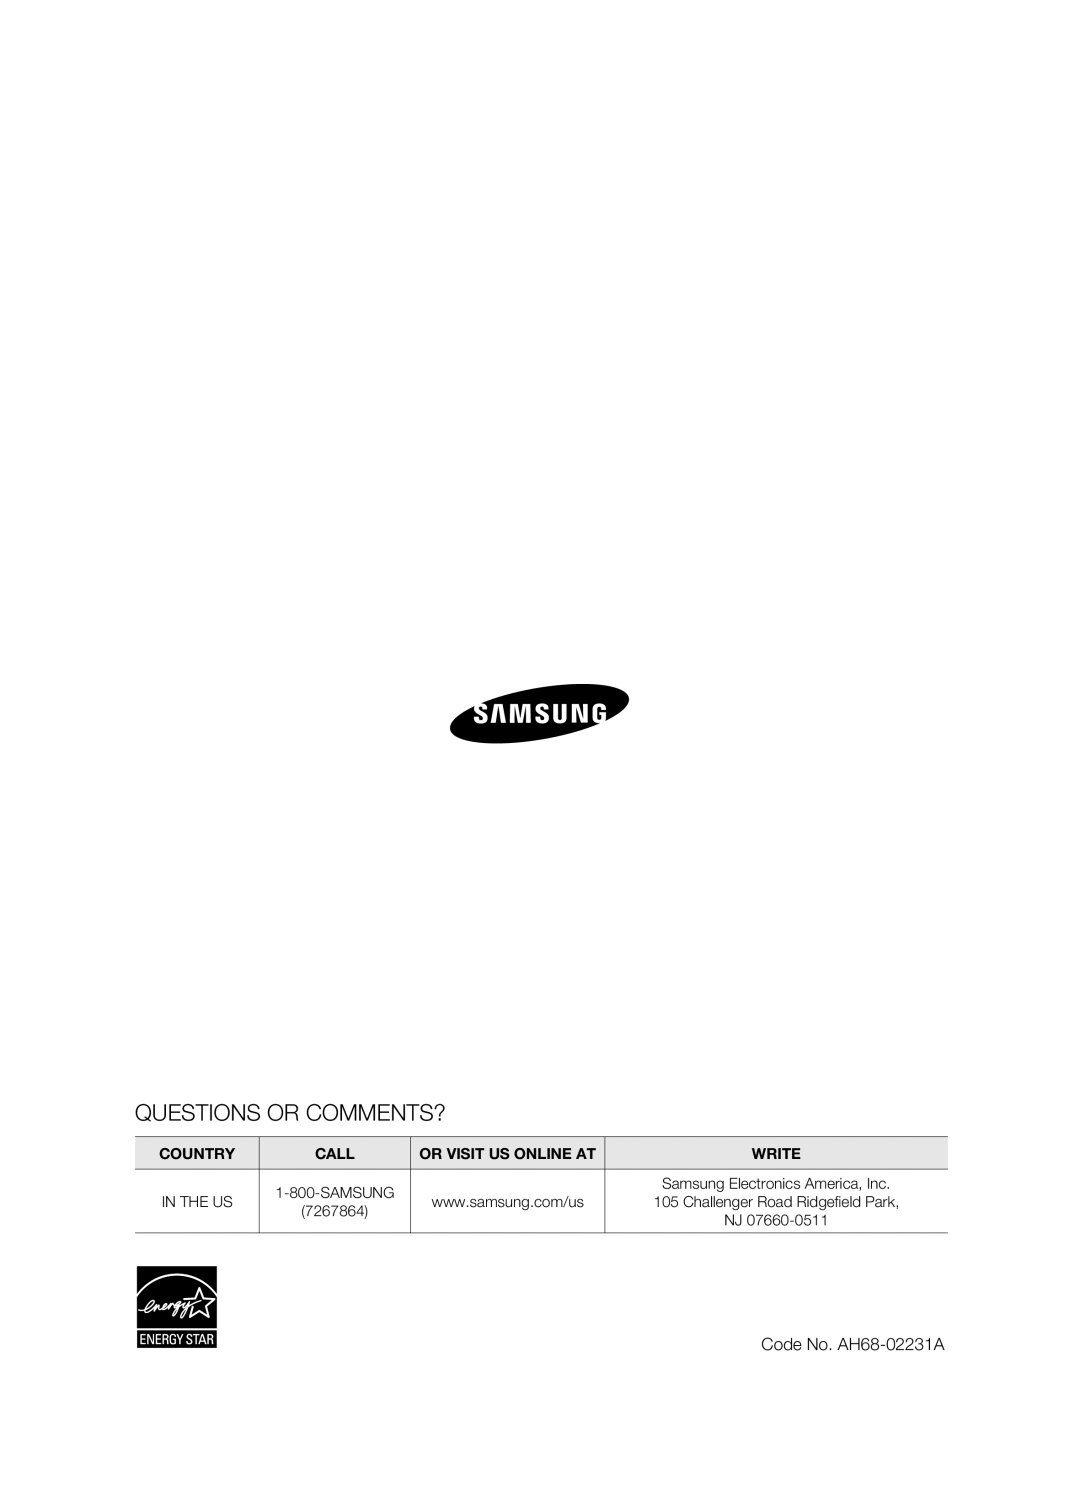 Samsung HT-BD3252 user manual Questions Or Comments?, Country, Call, Or Visit Us Online At, Write, Samsung, In The Us 